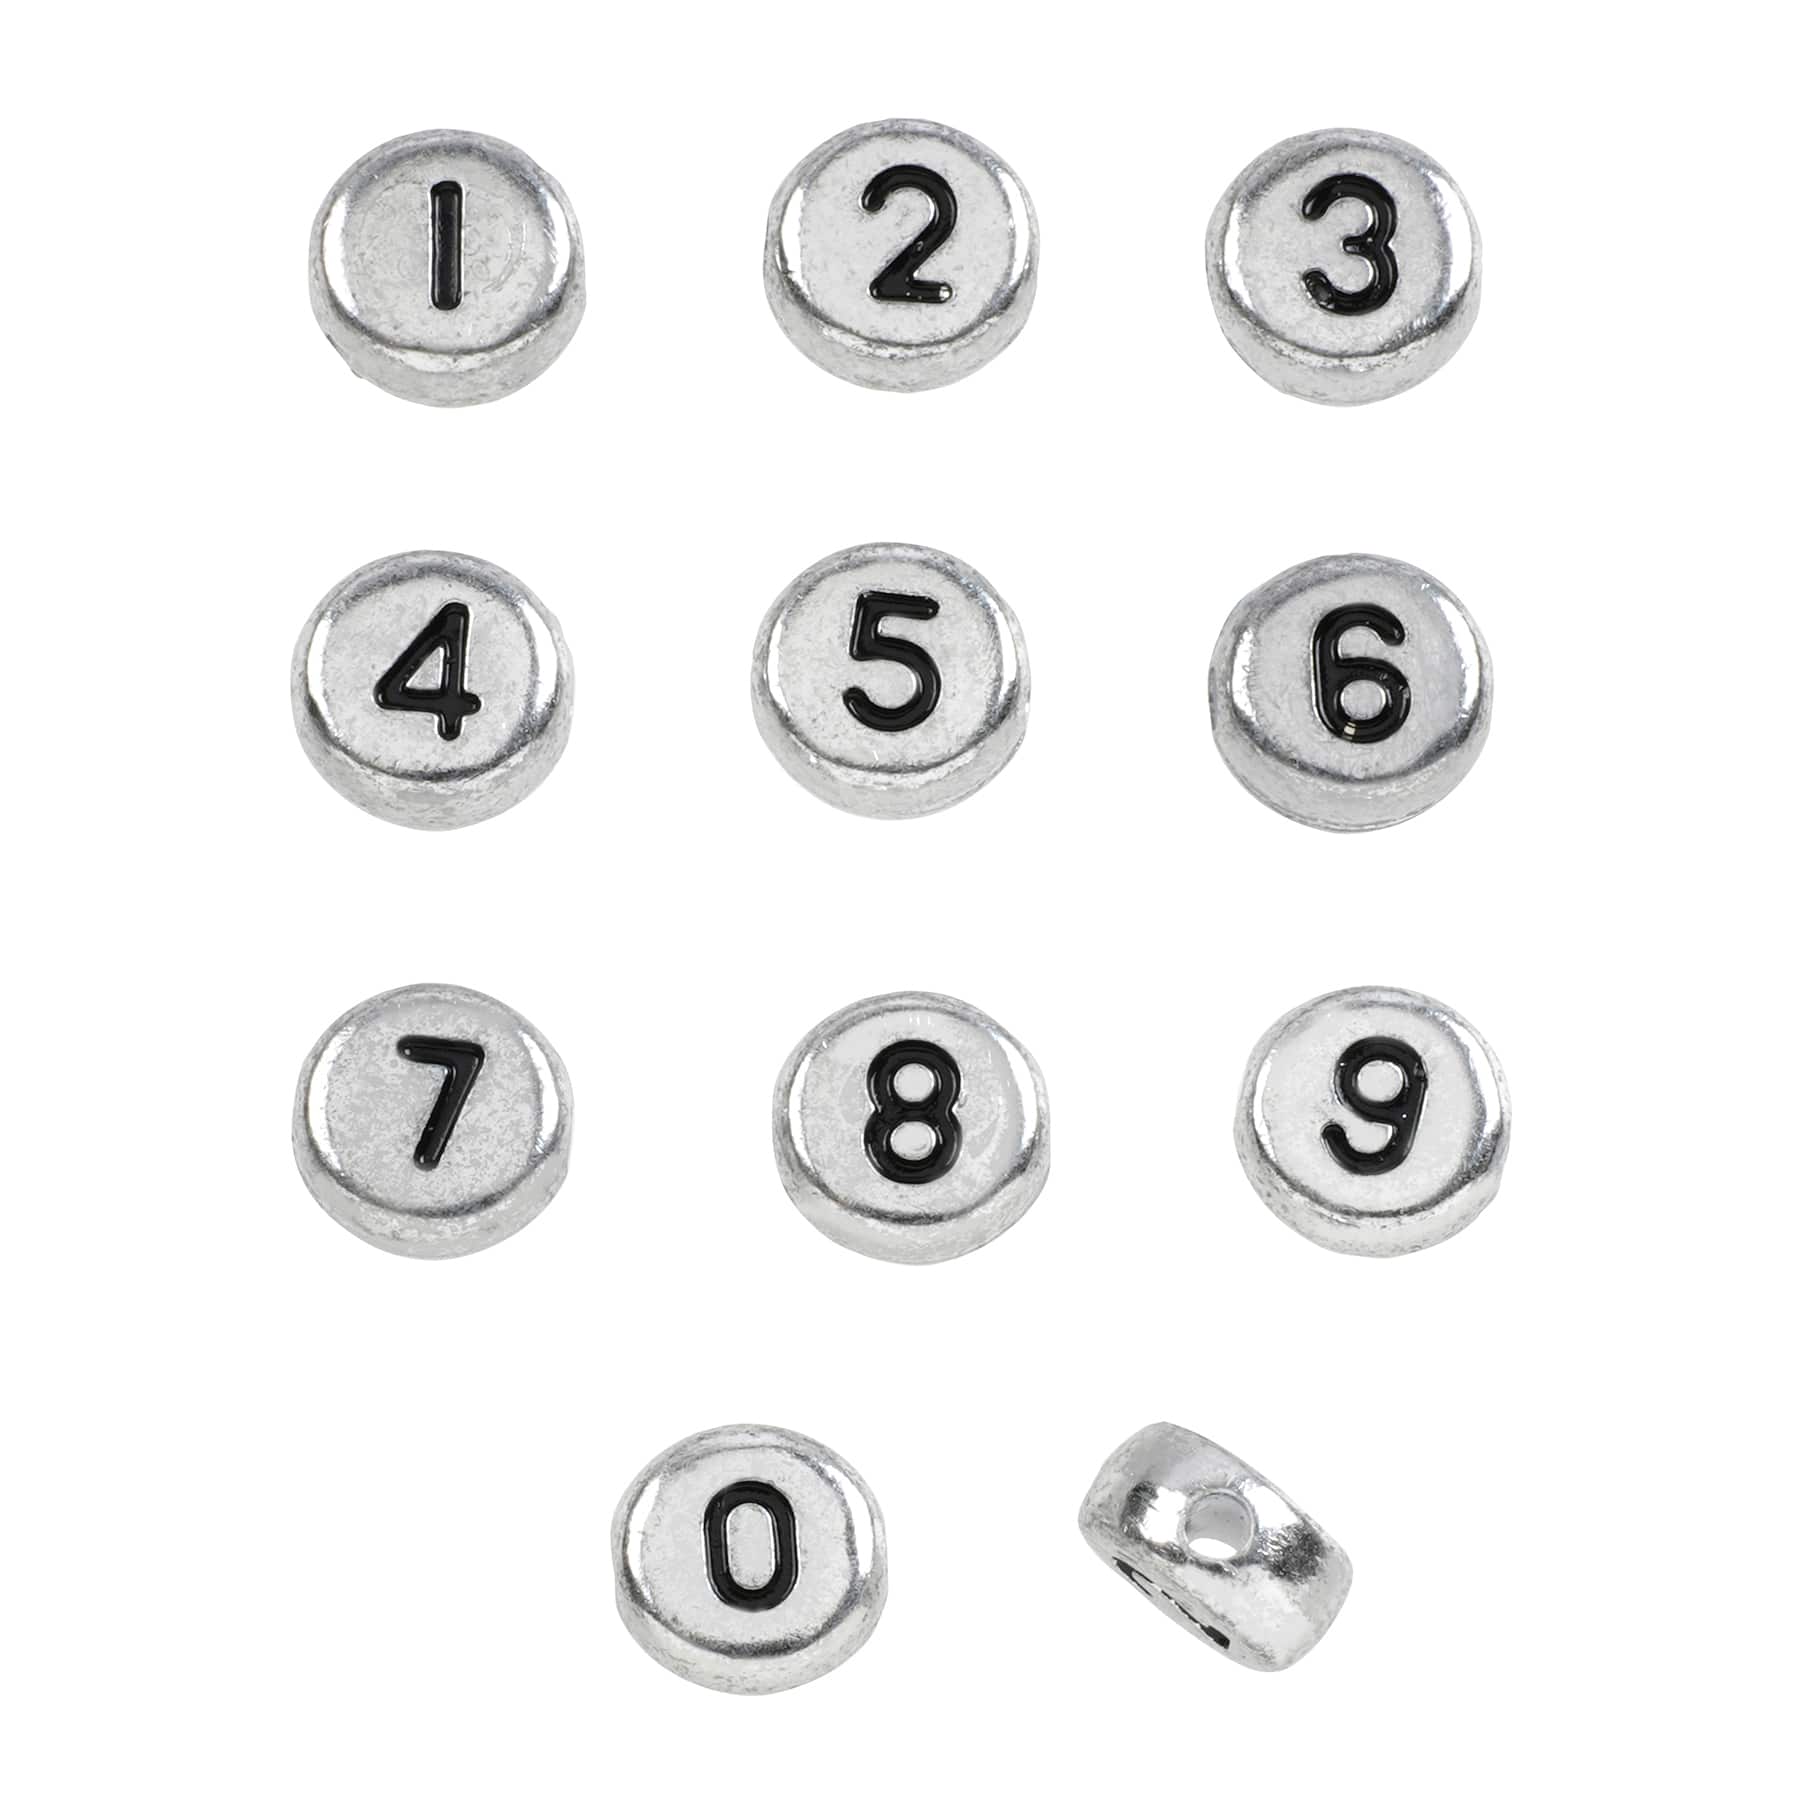 Wholesale 7mm blacked number and letter punch set Crafted To Perform Many  Other Tasks 